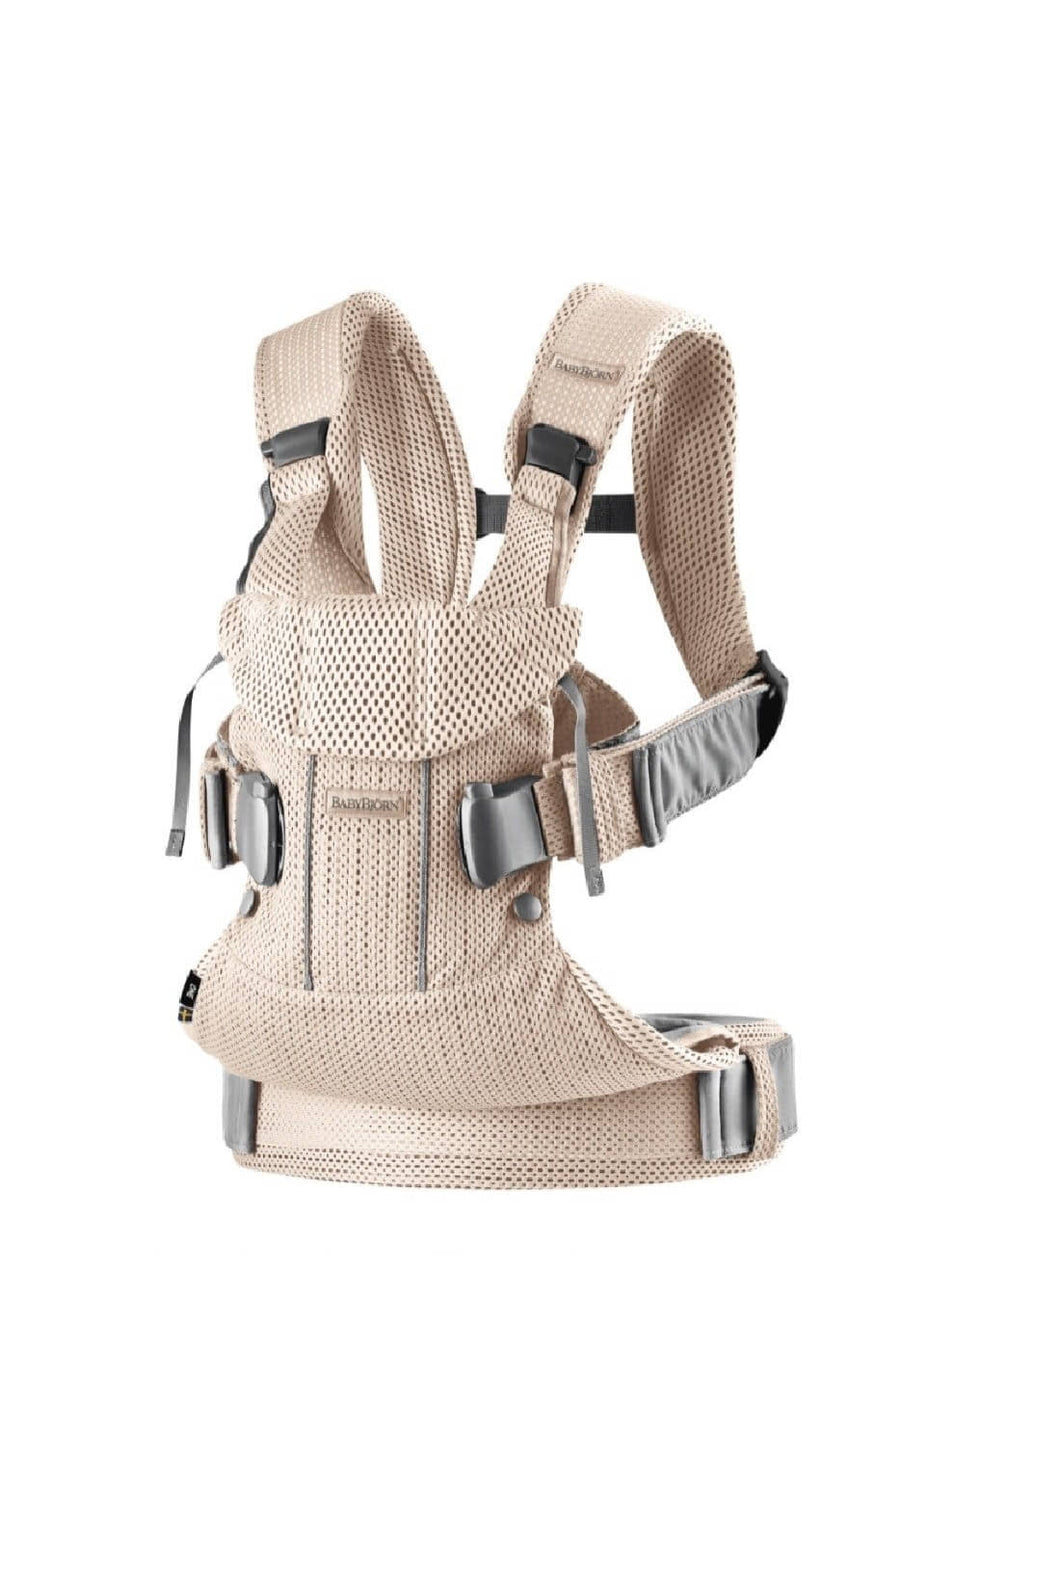 Babybjorn Baby Carrier One Air Pearly Pink 3D Mesh 1